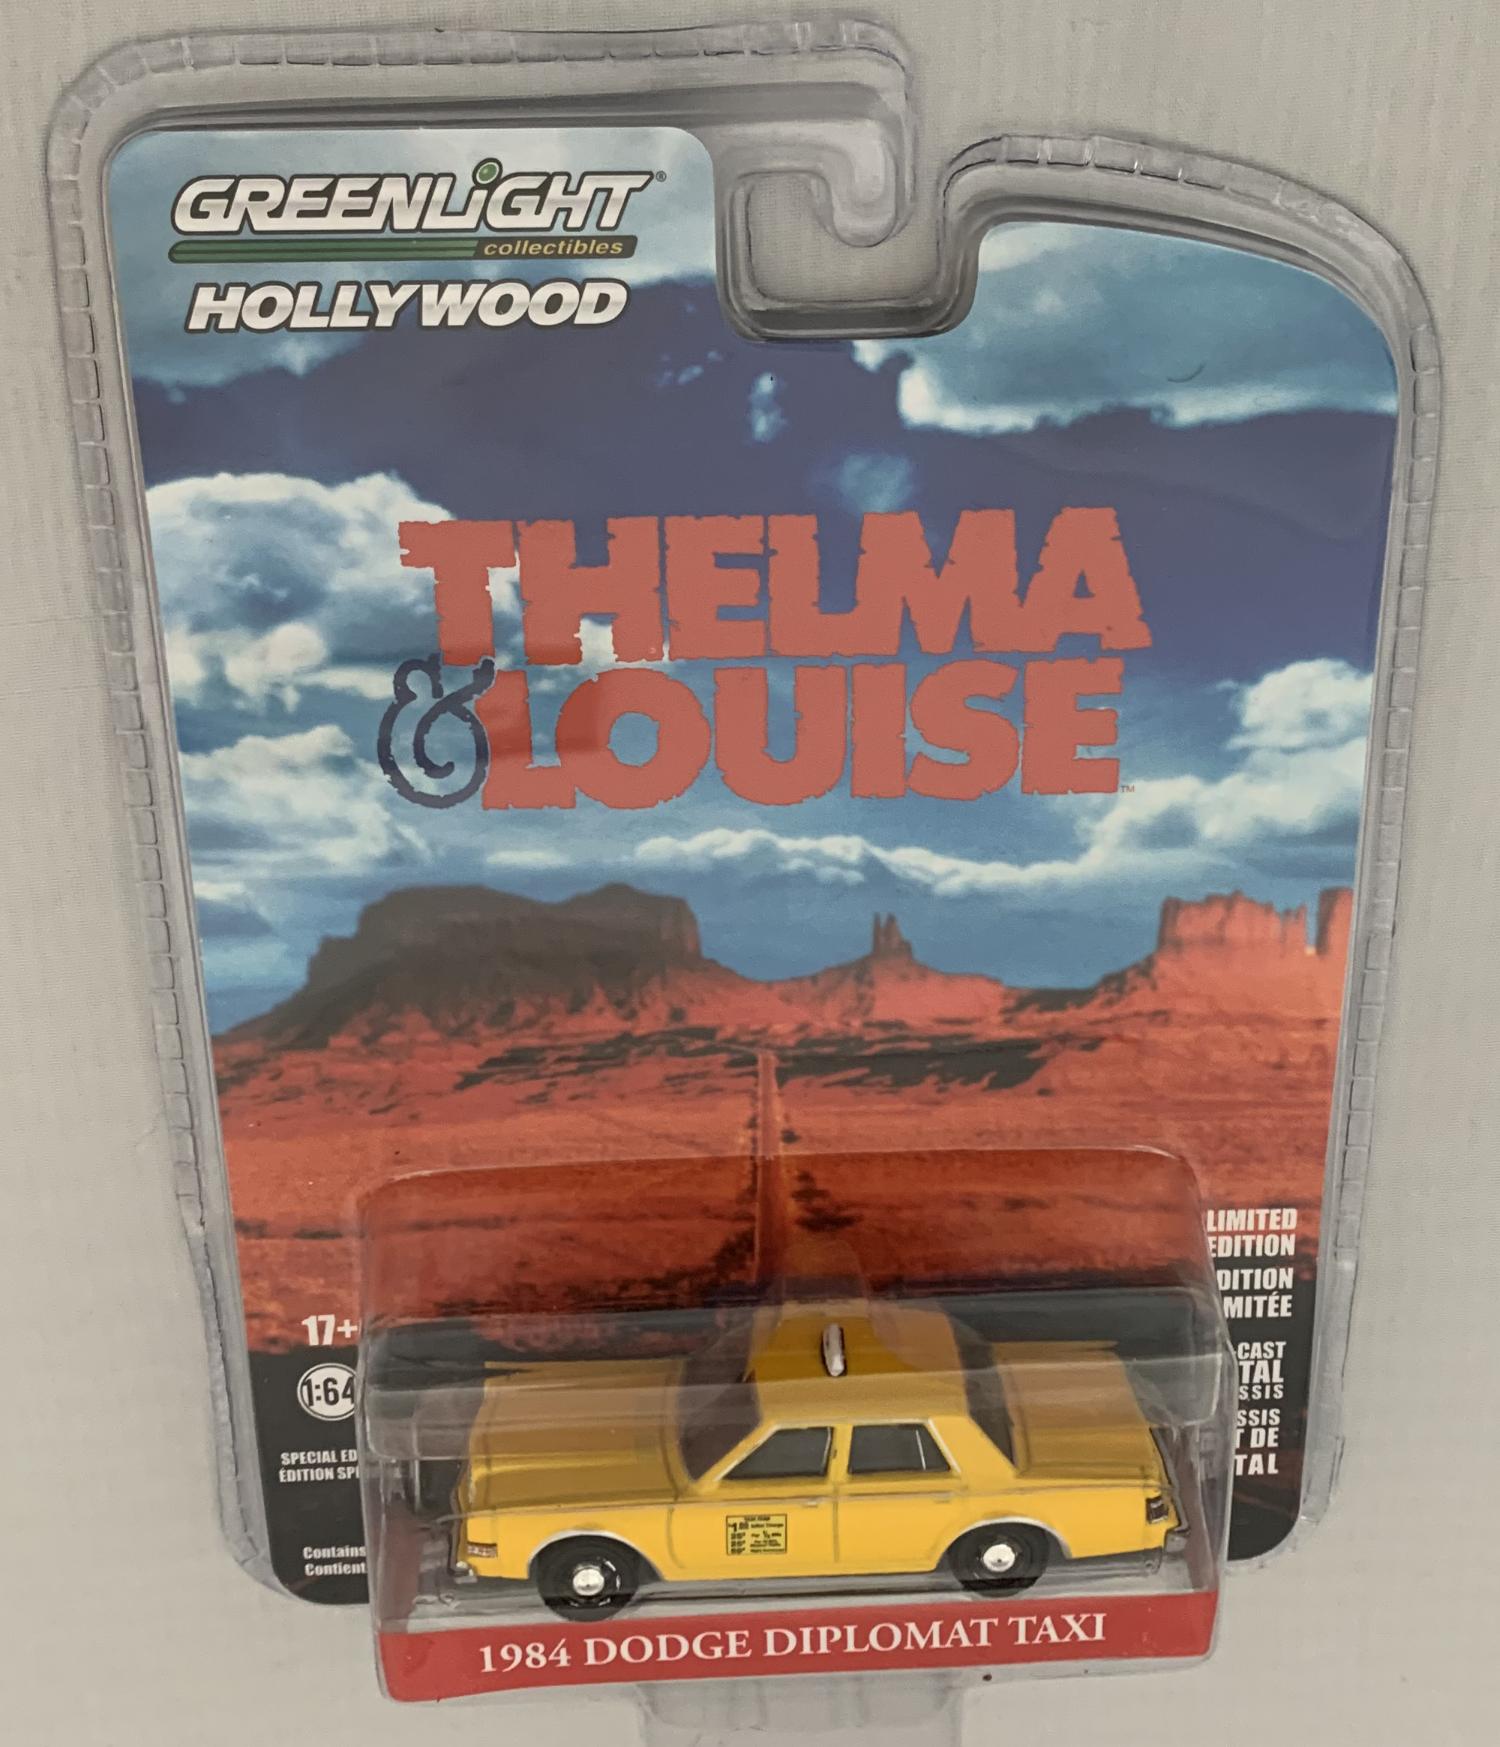 Thelma & Louise 1984 Dodge Diplomat Taxi in yellow 1:64 scale model from Greenlight, limited edition model